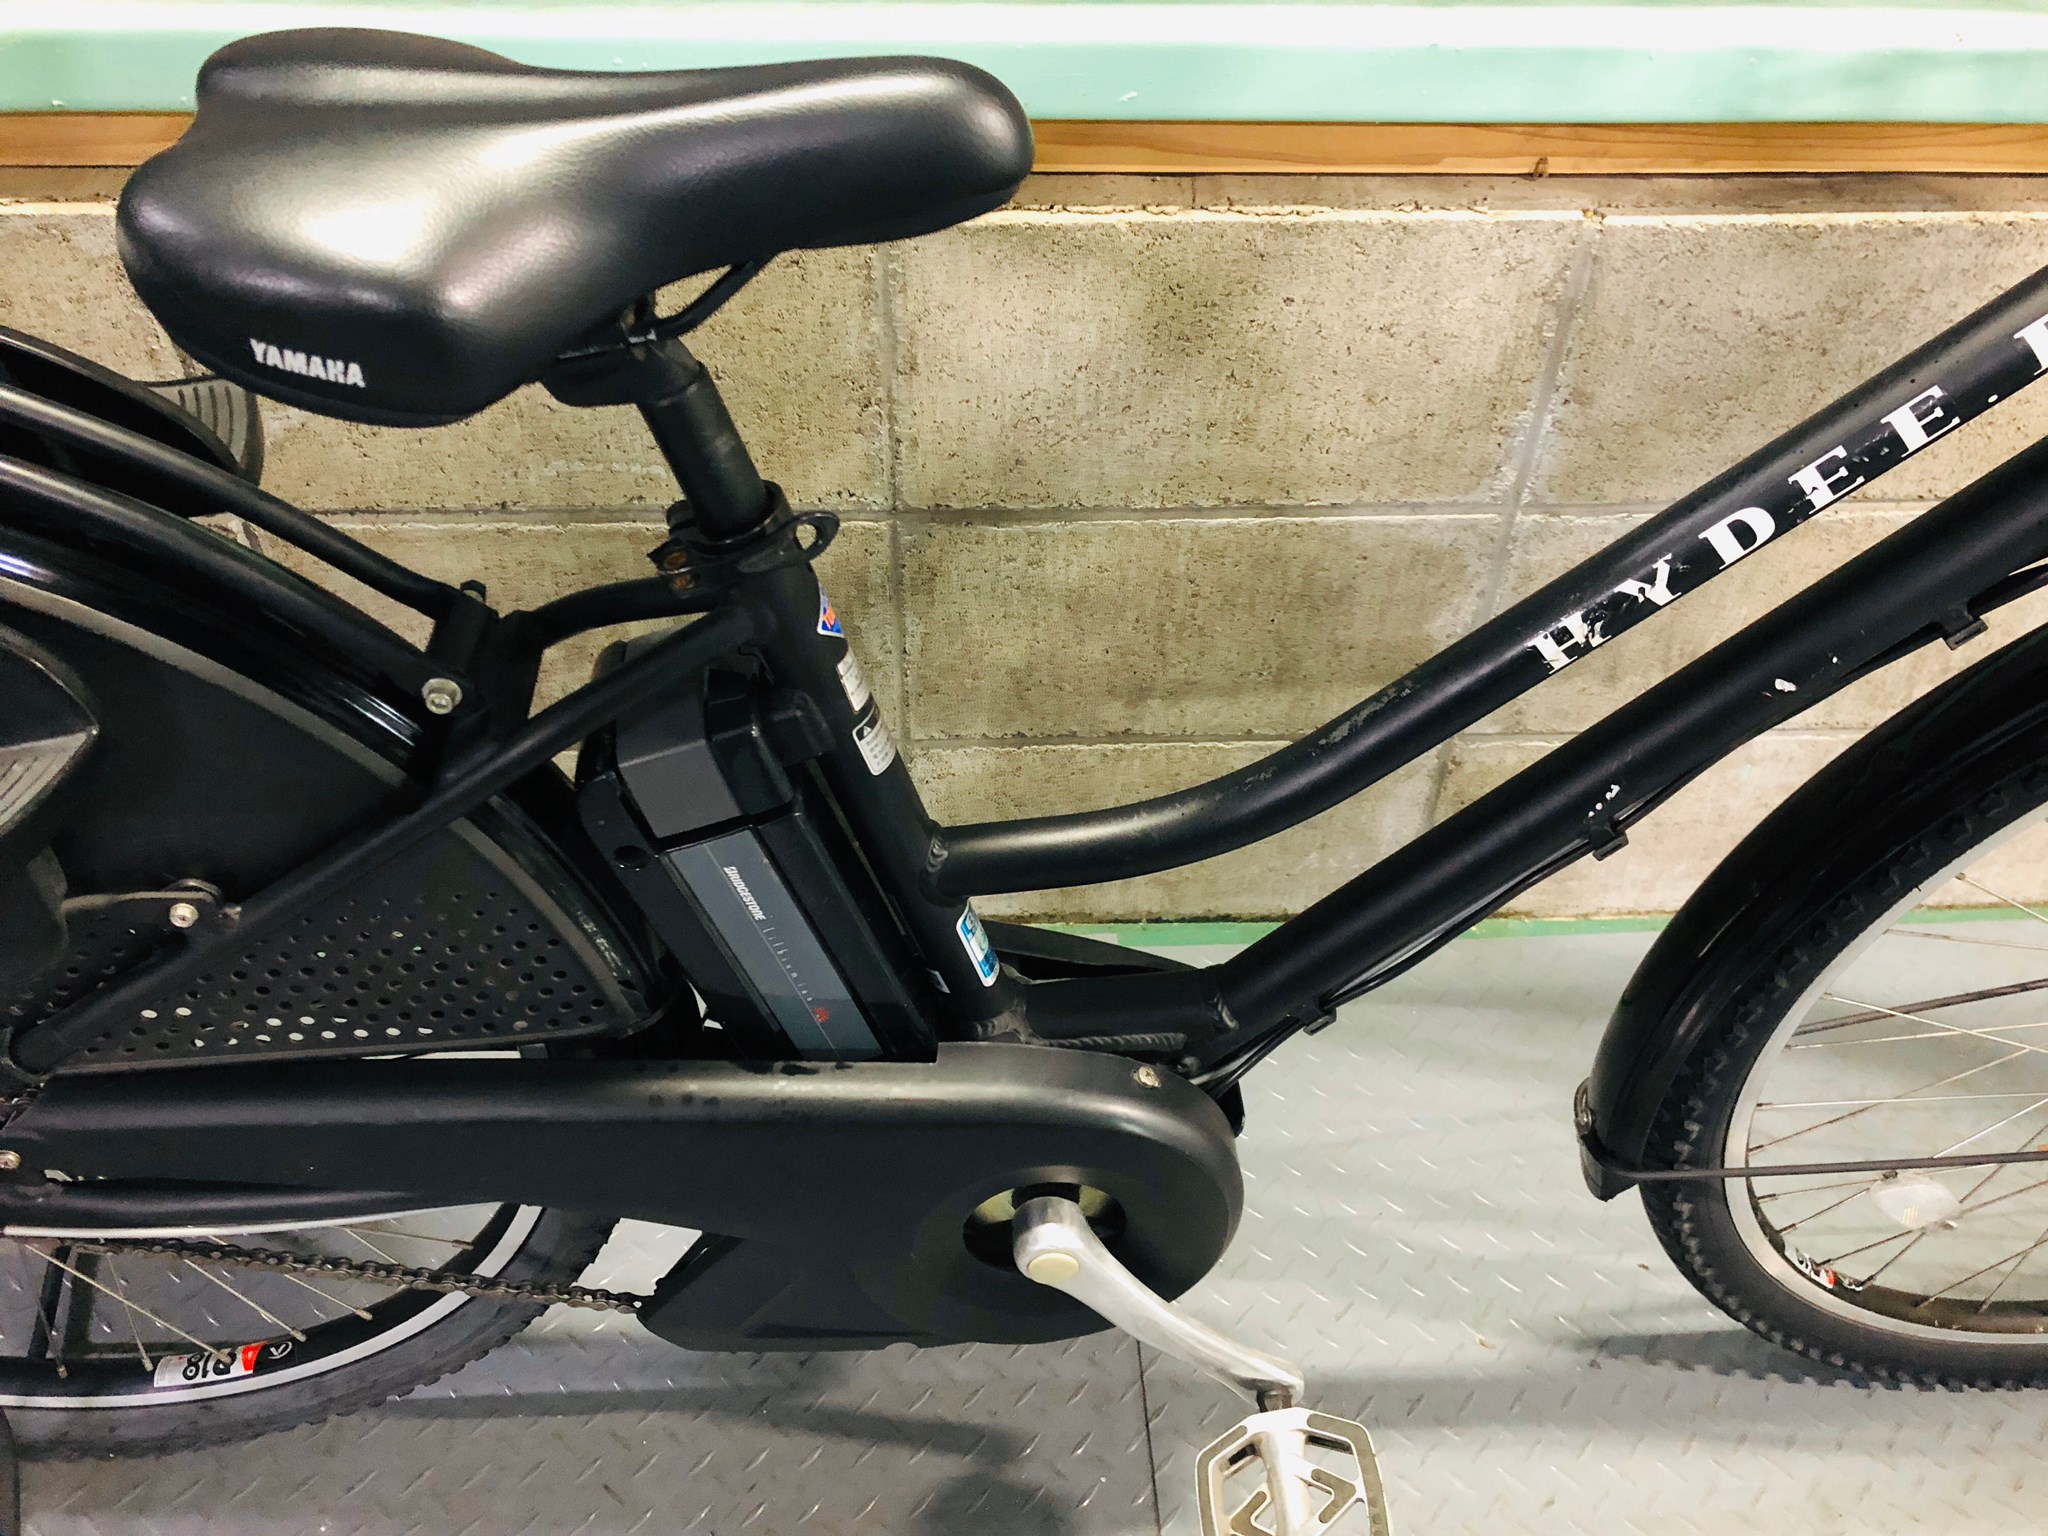 【SOLD OUT】電動自転車 ブリヂストン HYDEE.B 26インチ 子供乗せ 8.9Ah | 国産・中古の激安電動アシスト自転車を販売